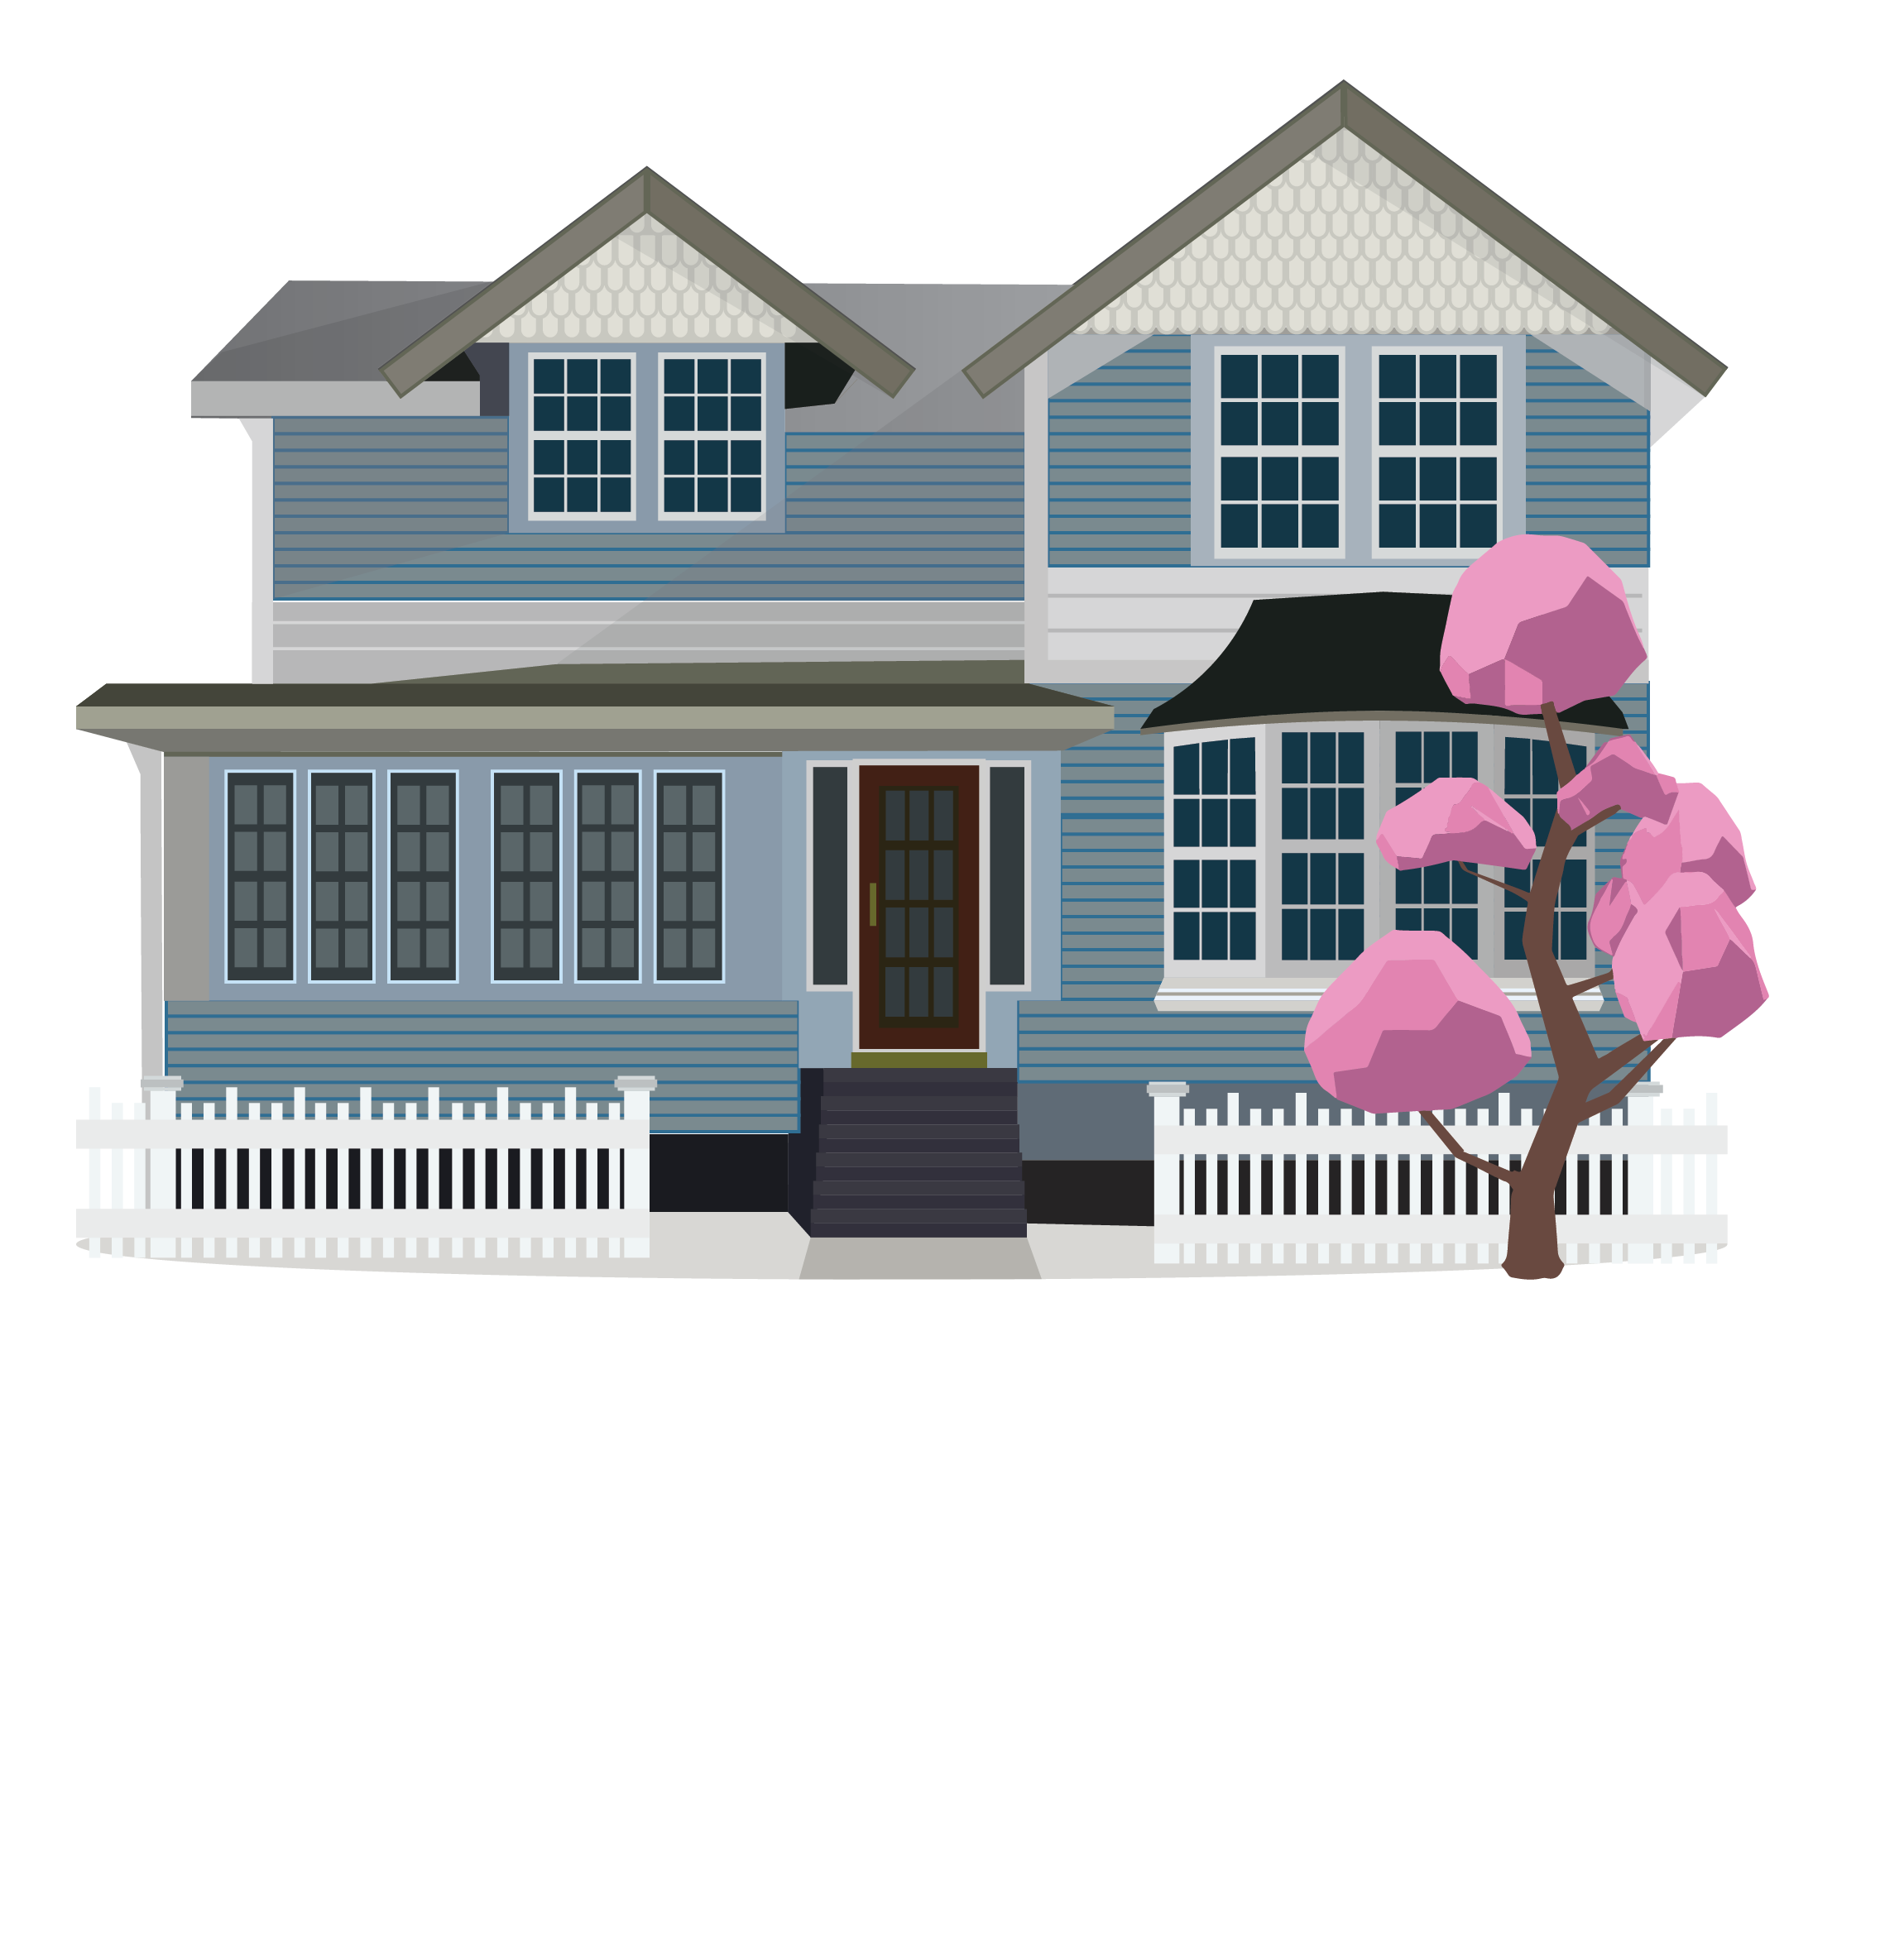 The Delaney House